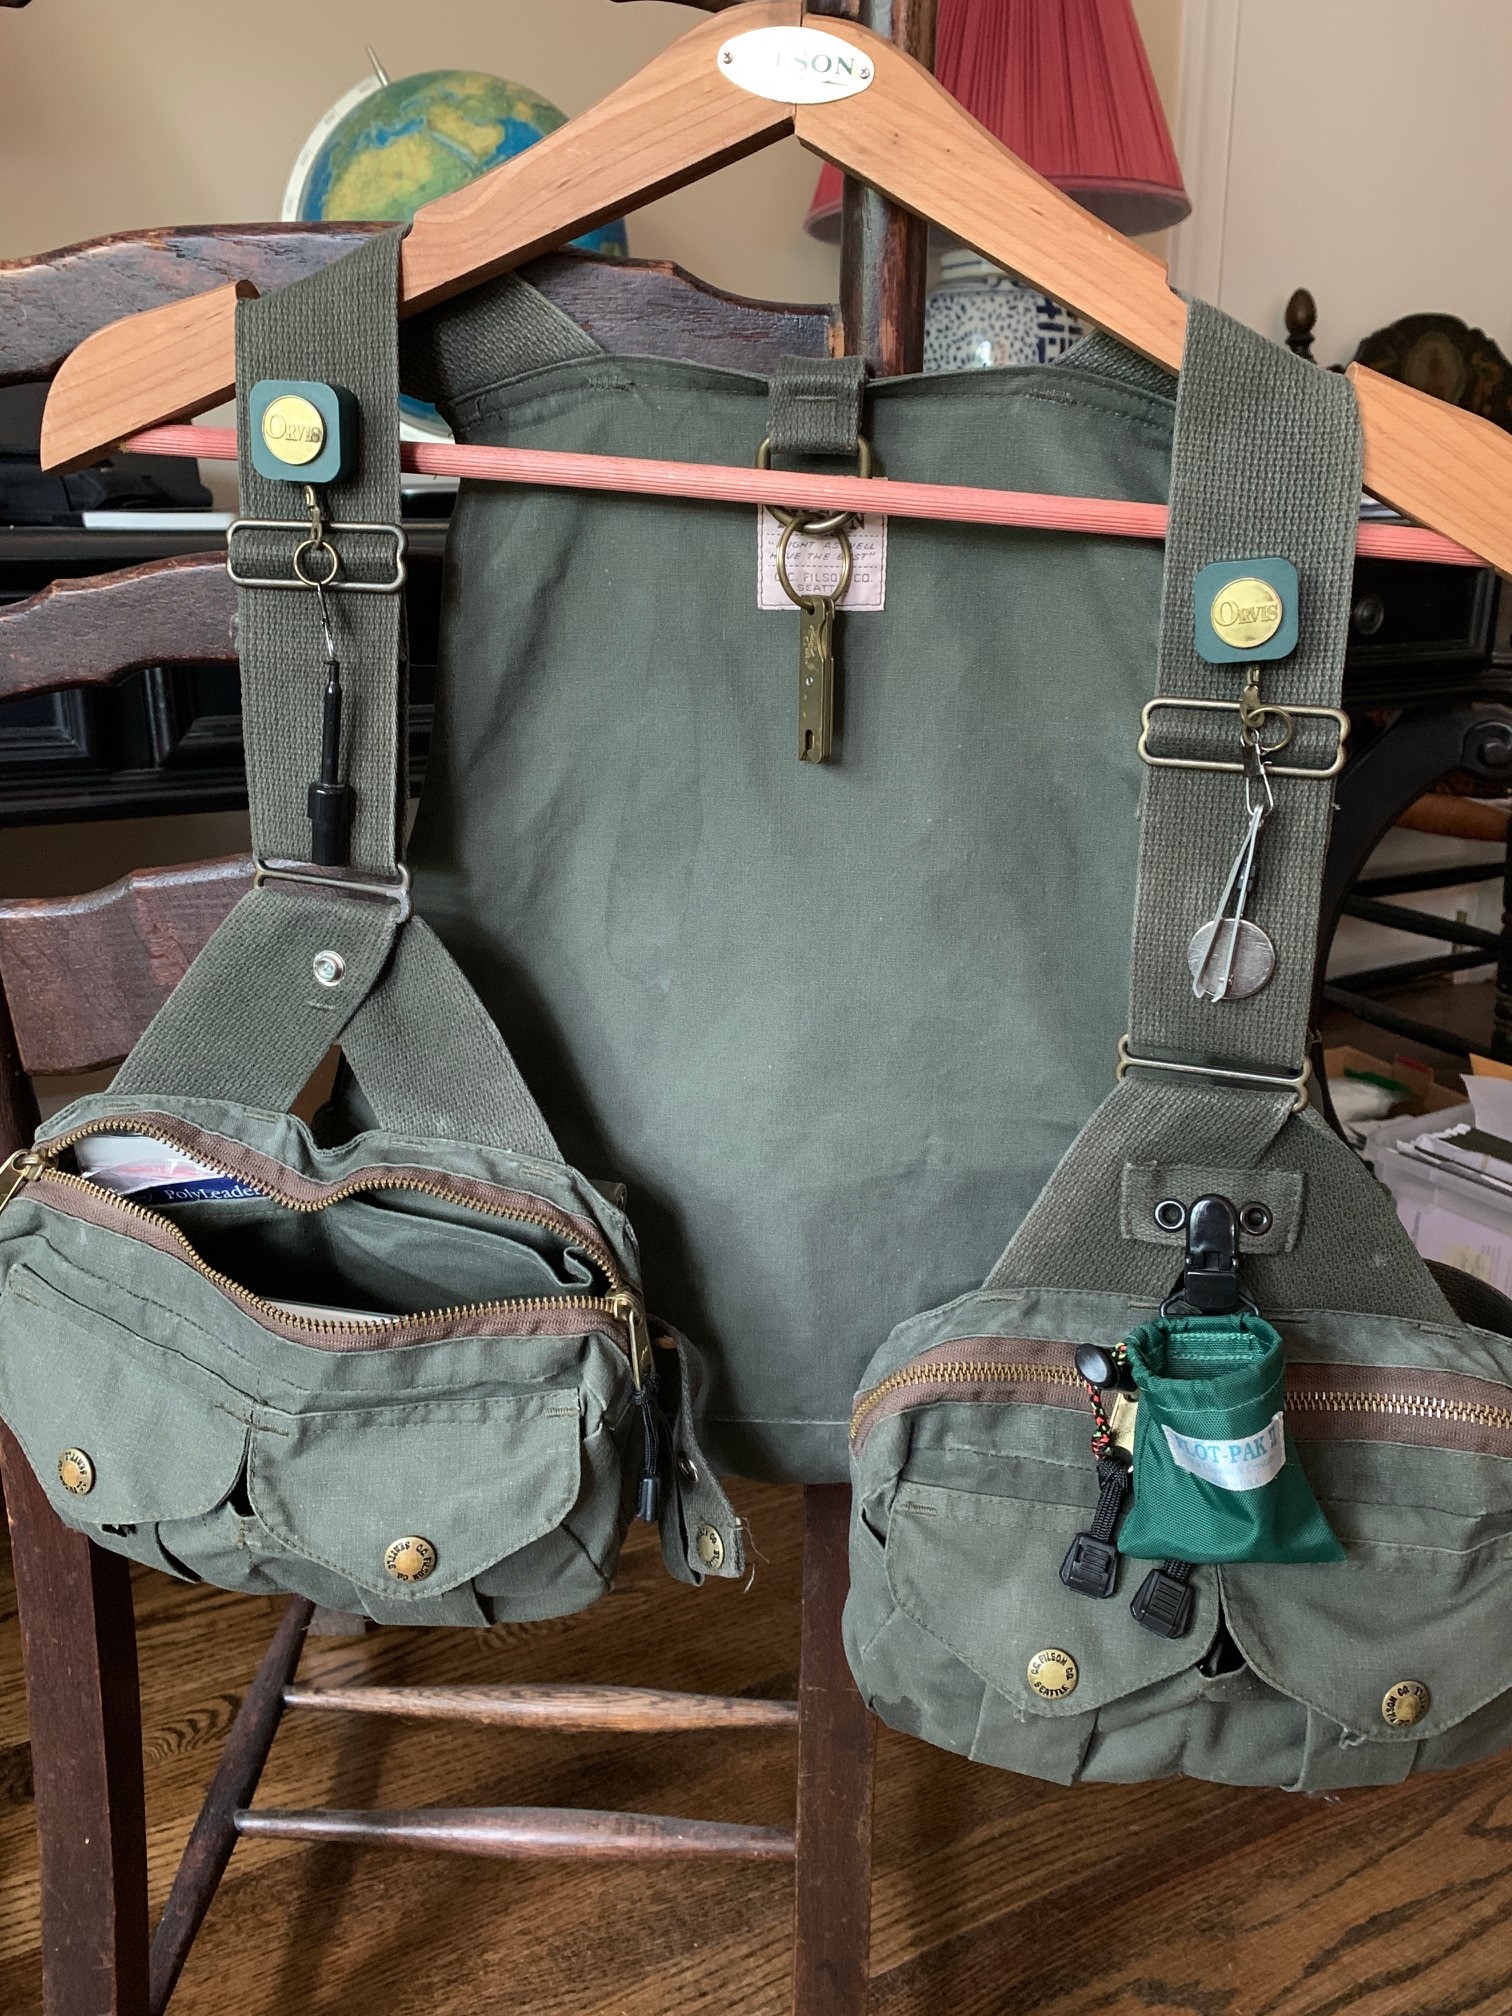 If you own a Filson Guide or Strap vest, you might want to try